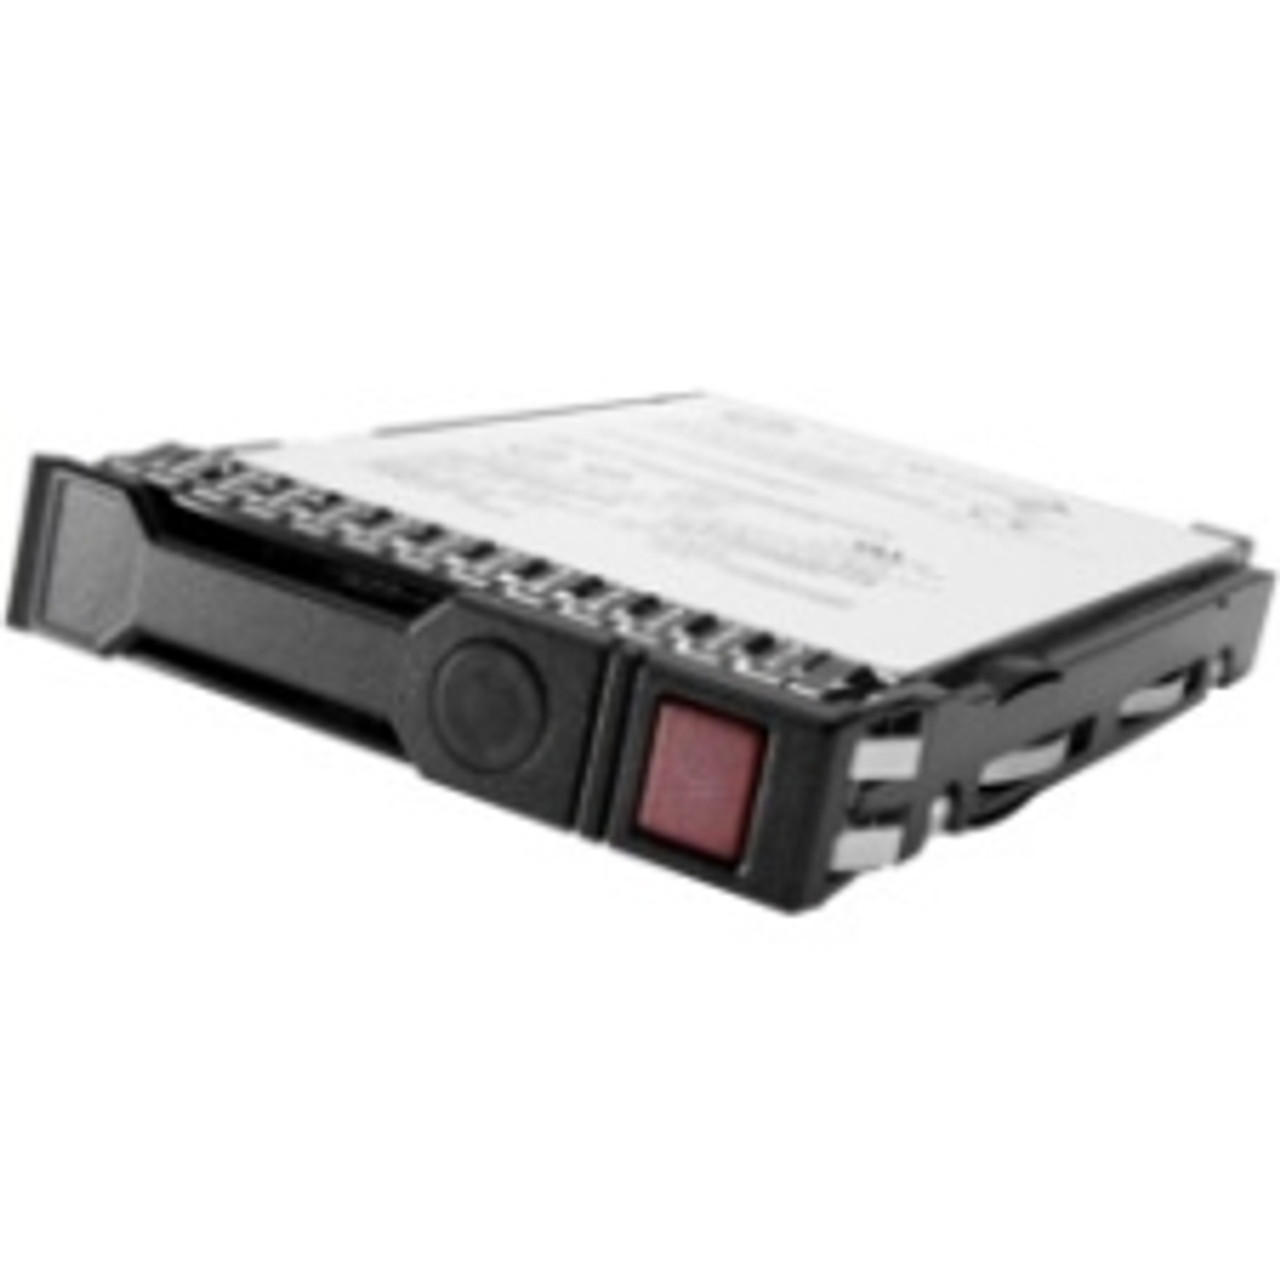 872475-B21 HPE 300GB 10000RPM SAS 12Gbps 2.5-inch Internal Hard Drive with Smart Carrier